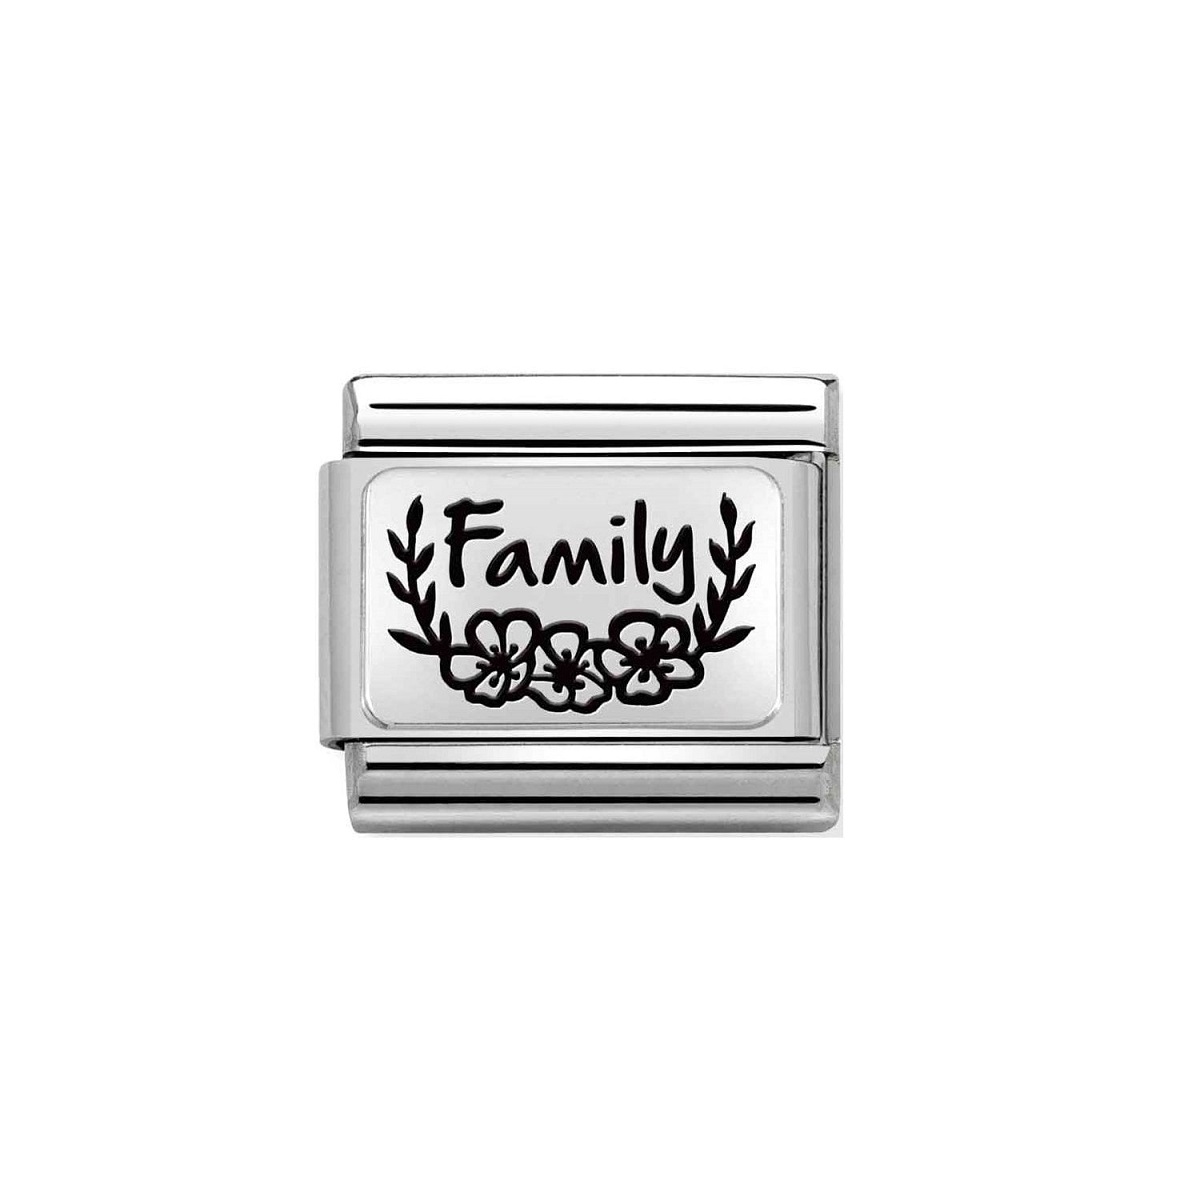 Nomination Classic Flowers Charm - Sterling Silver and Black Enamel Family